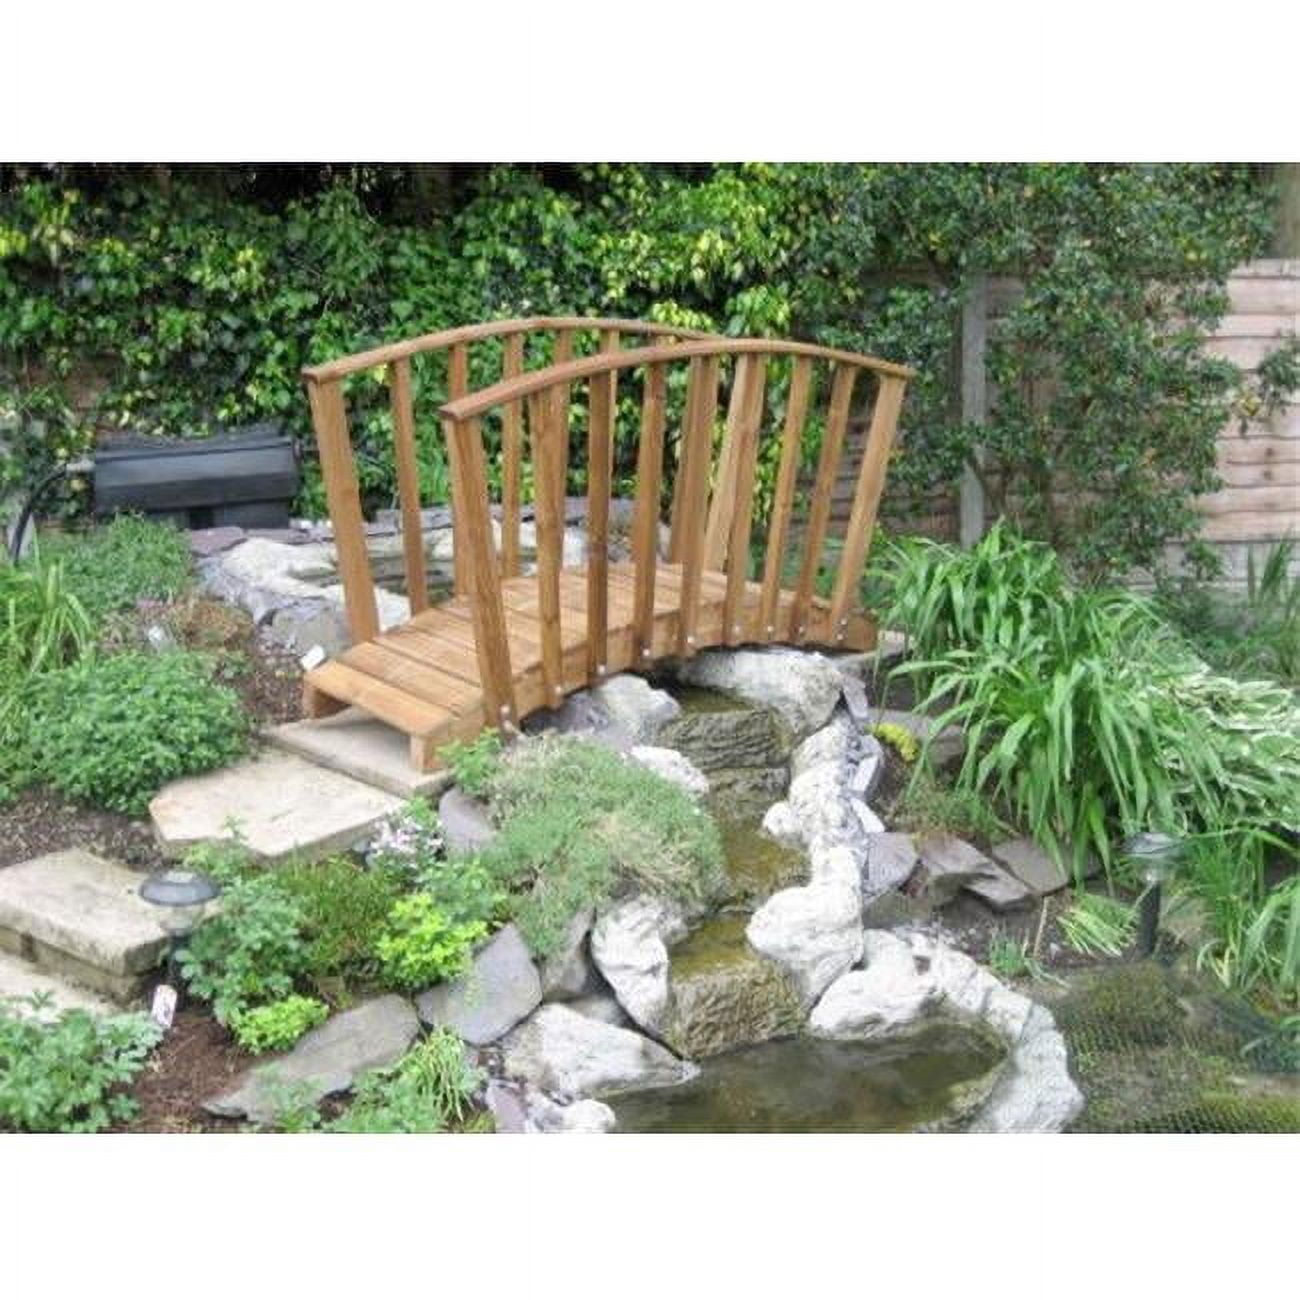 12 Ft. Monets Red Cedar Bridge With Curved Wisteria Canopy